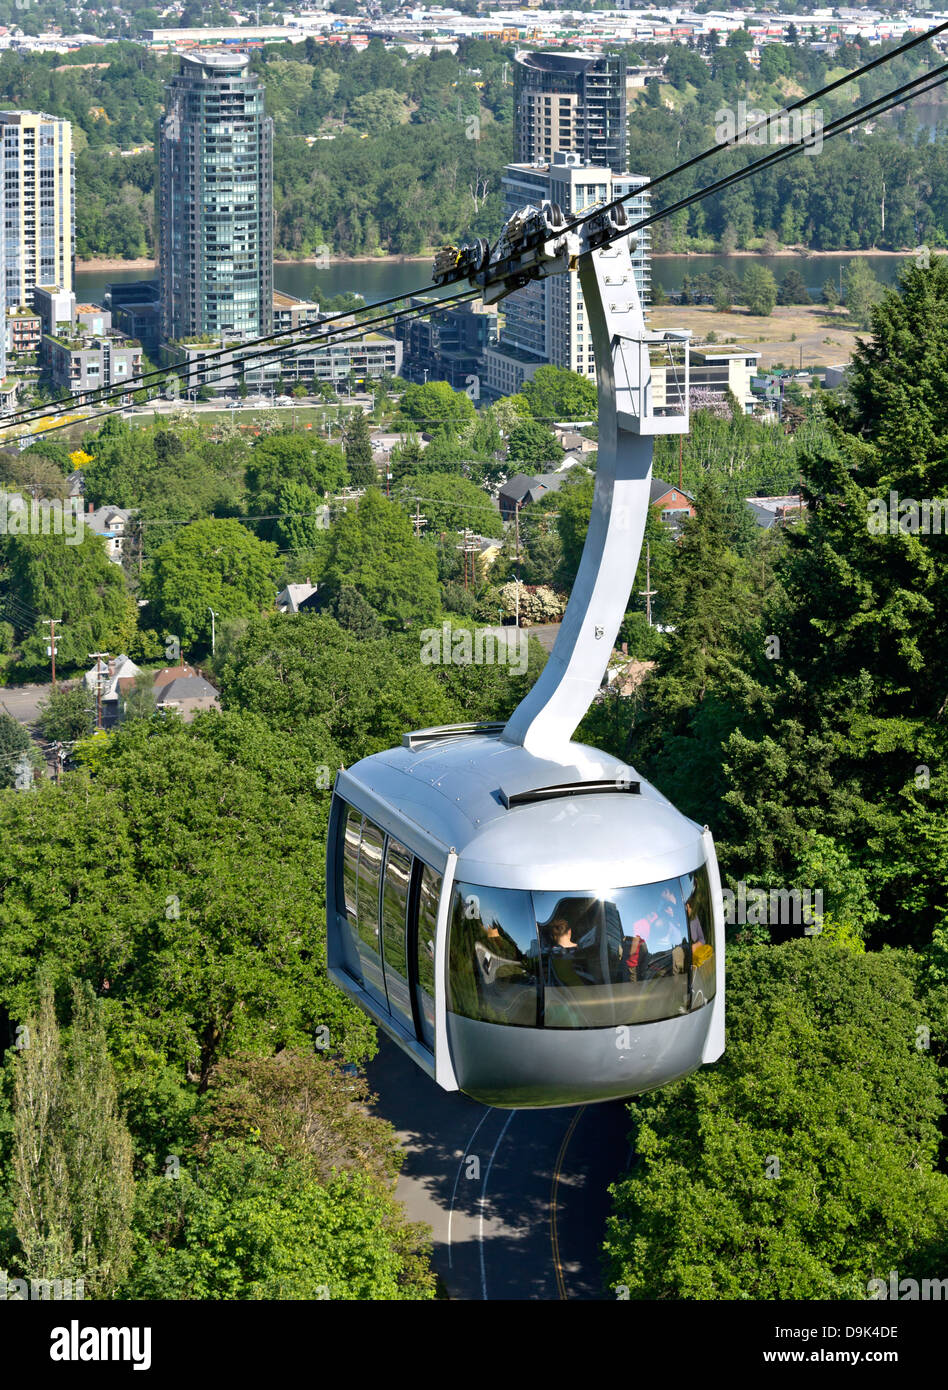 An aerial tram transporting people to and from the hilltop in Portland Oregon. Stock Photo